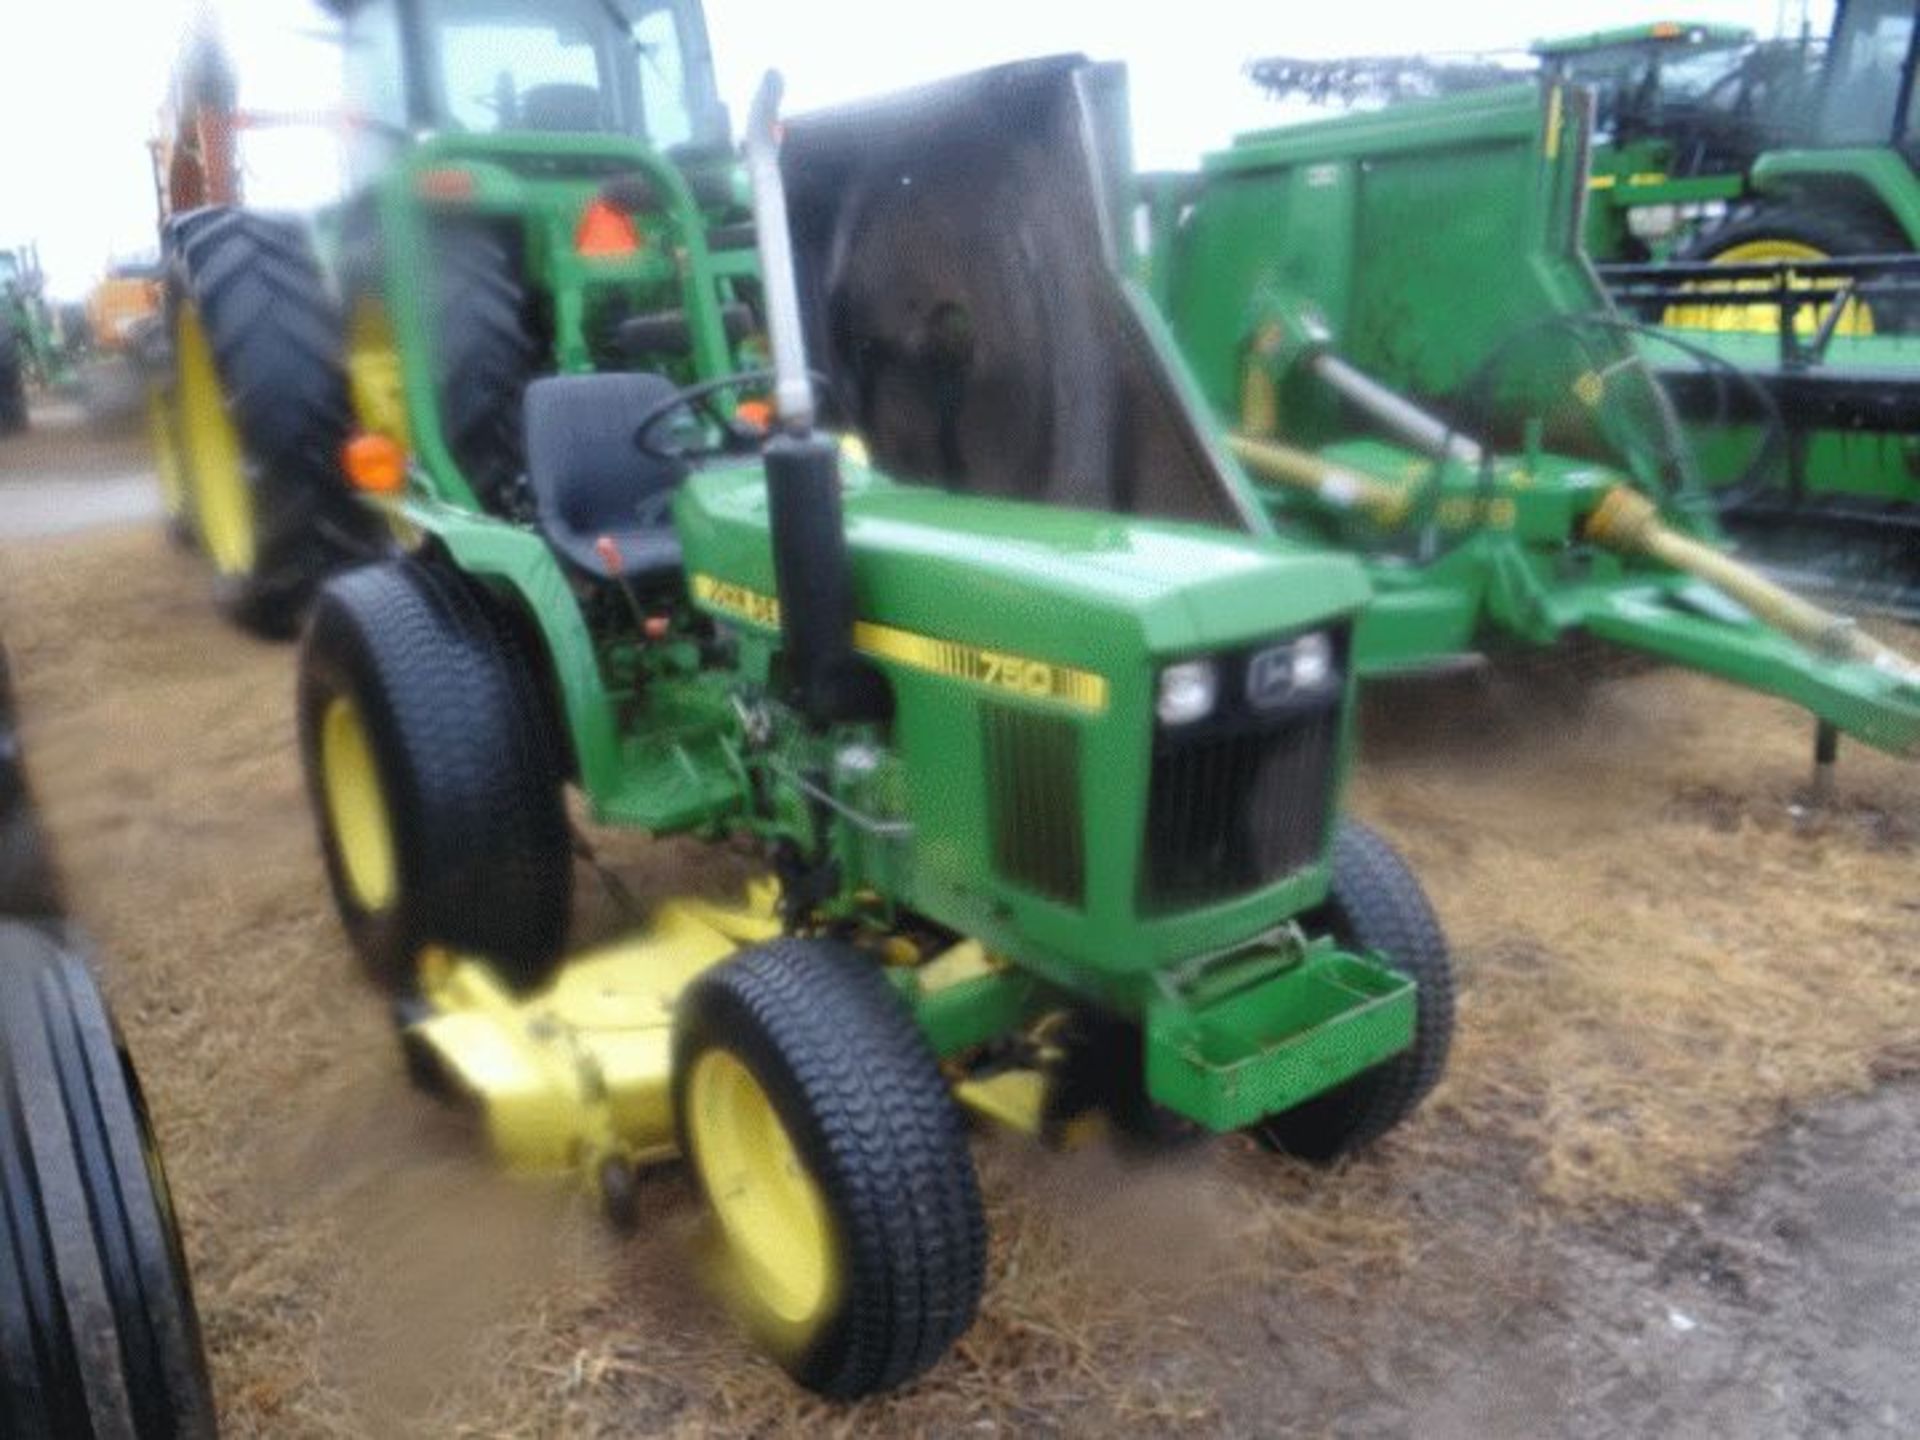 Lot # 1734 JD 750 Compact Tractor, 1986 #109889, 850 hrs, 60" Deck, 2 wd - Image 2 of 3